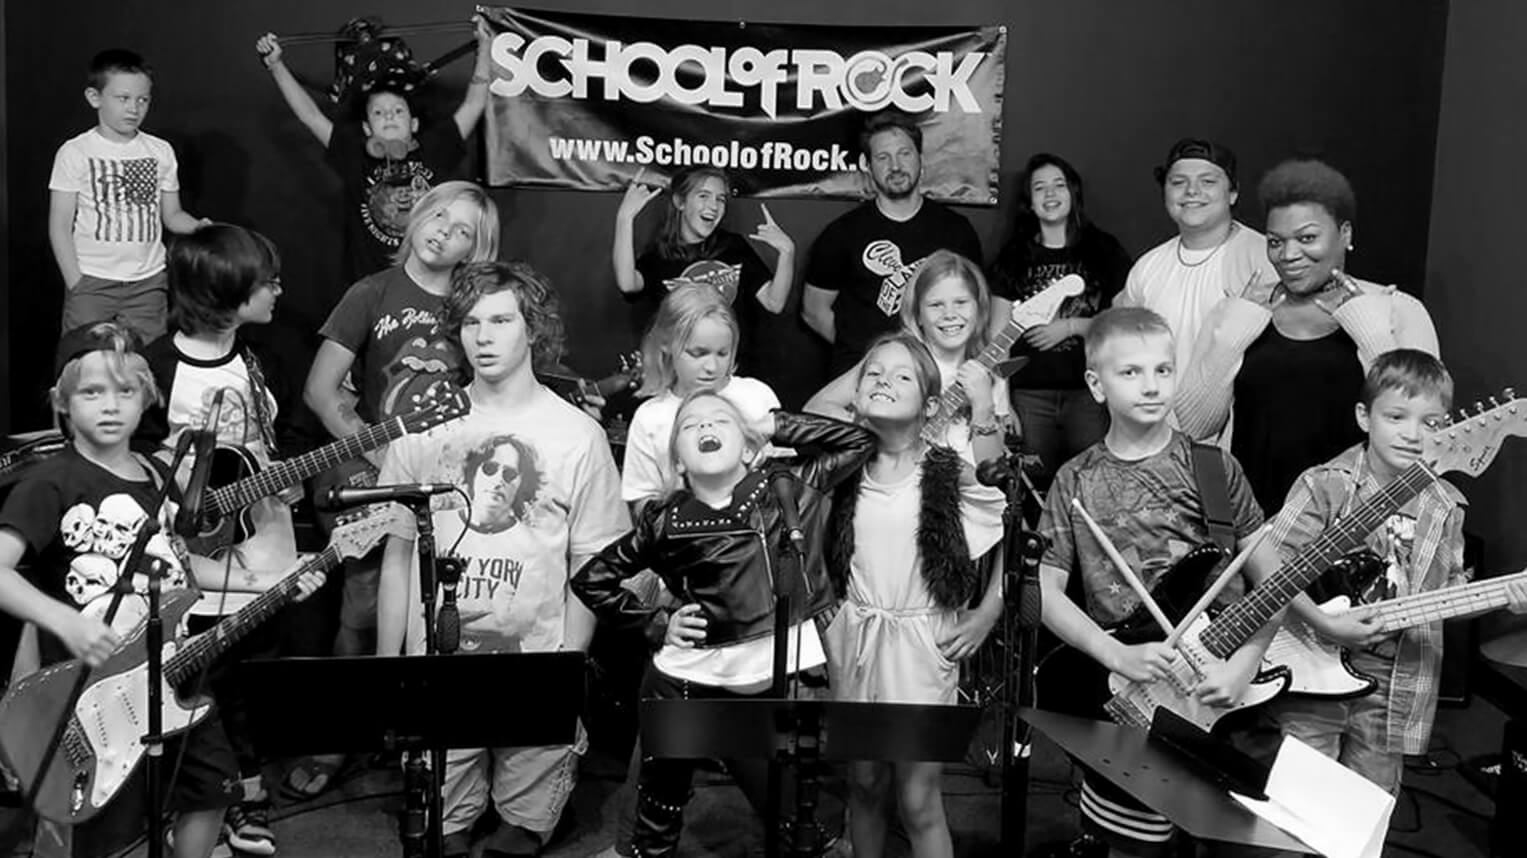 Local Summer Music Camps at School of Rock, summer music camp, live camp performances, daily summer camp